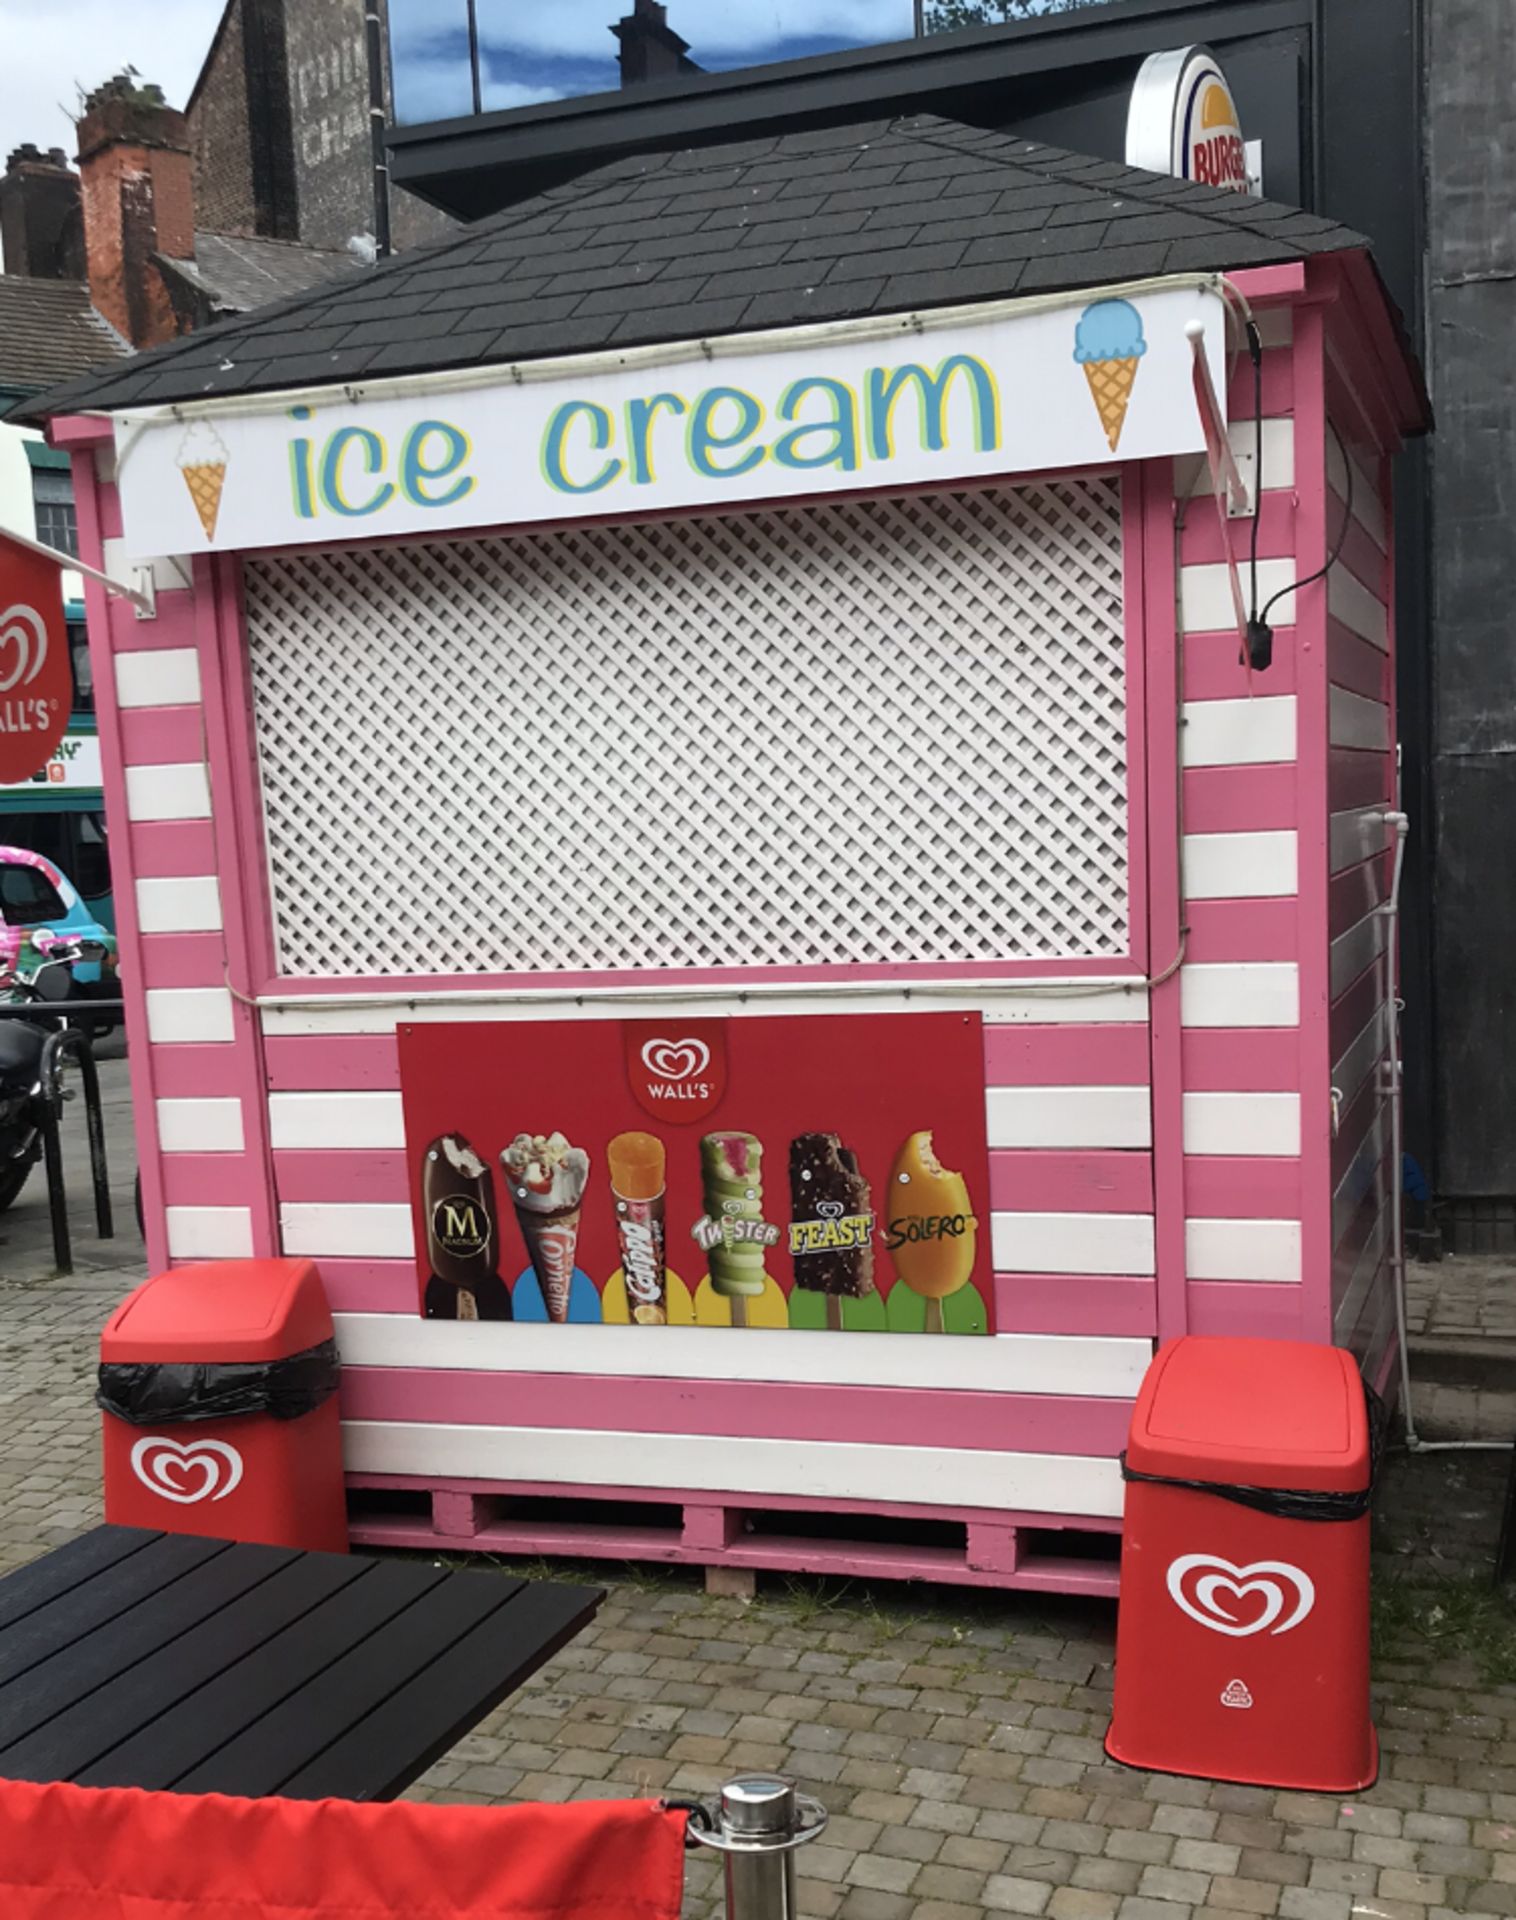 1 x Ice Cream Kiosk - 8ft x 6ft - Fitted With Sink, Hot Water And 3-Phase Supply - CL535 - Ref: ALF0 - Image 2 of 5